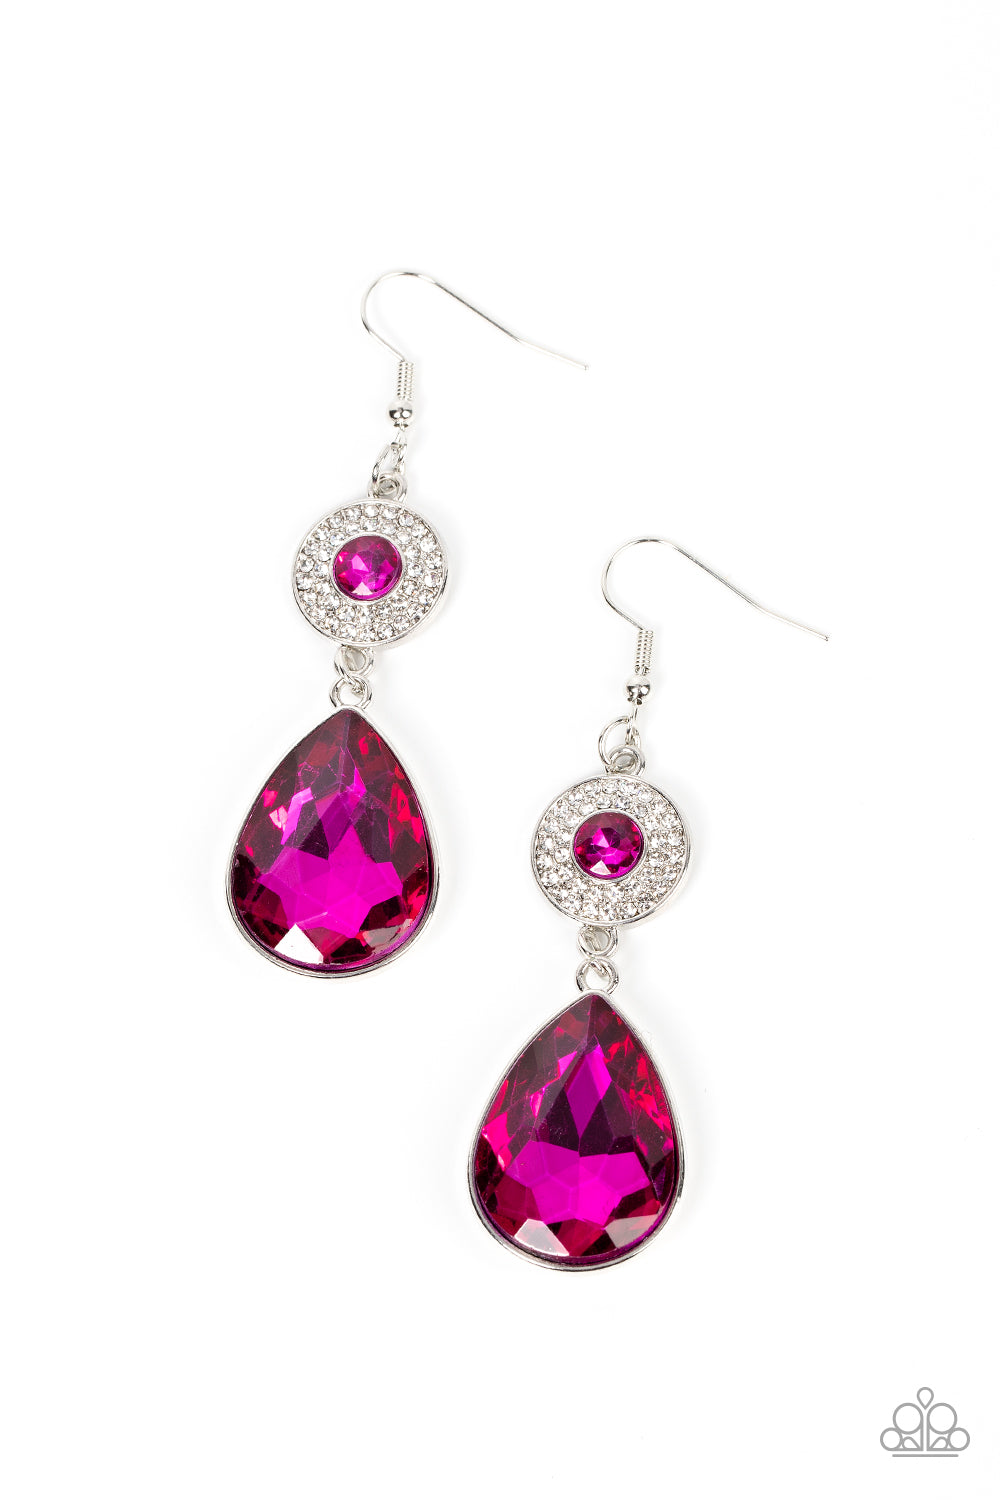 Paparazzi Earrings - Collecting My Royalties - Pink